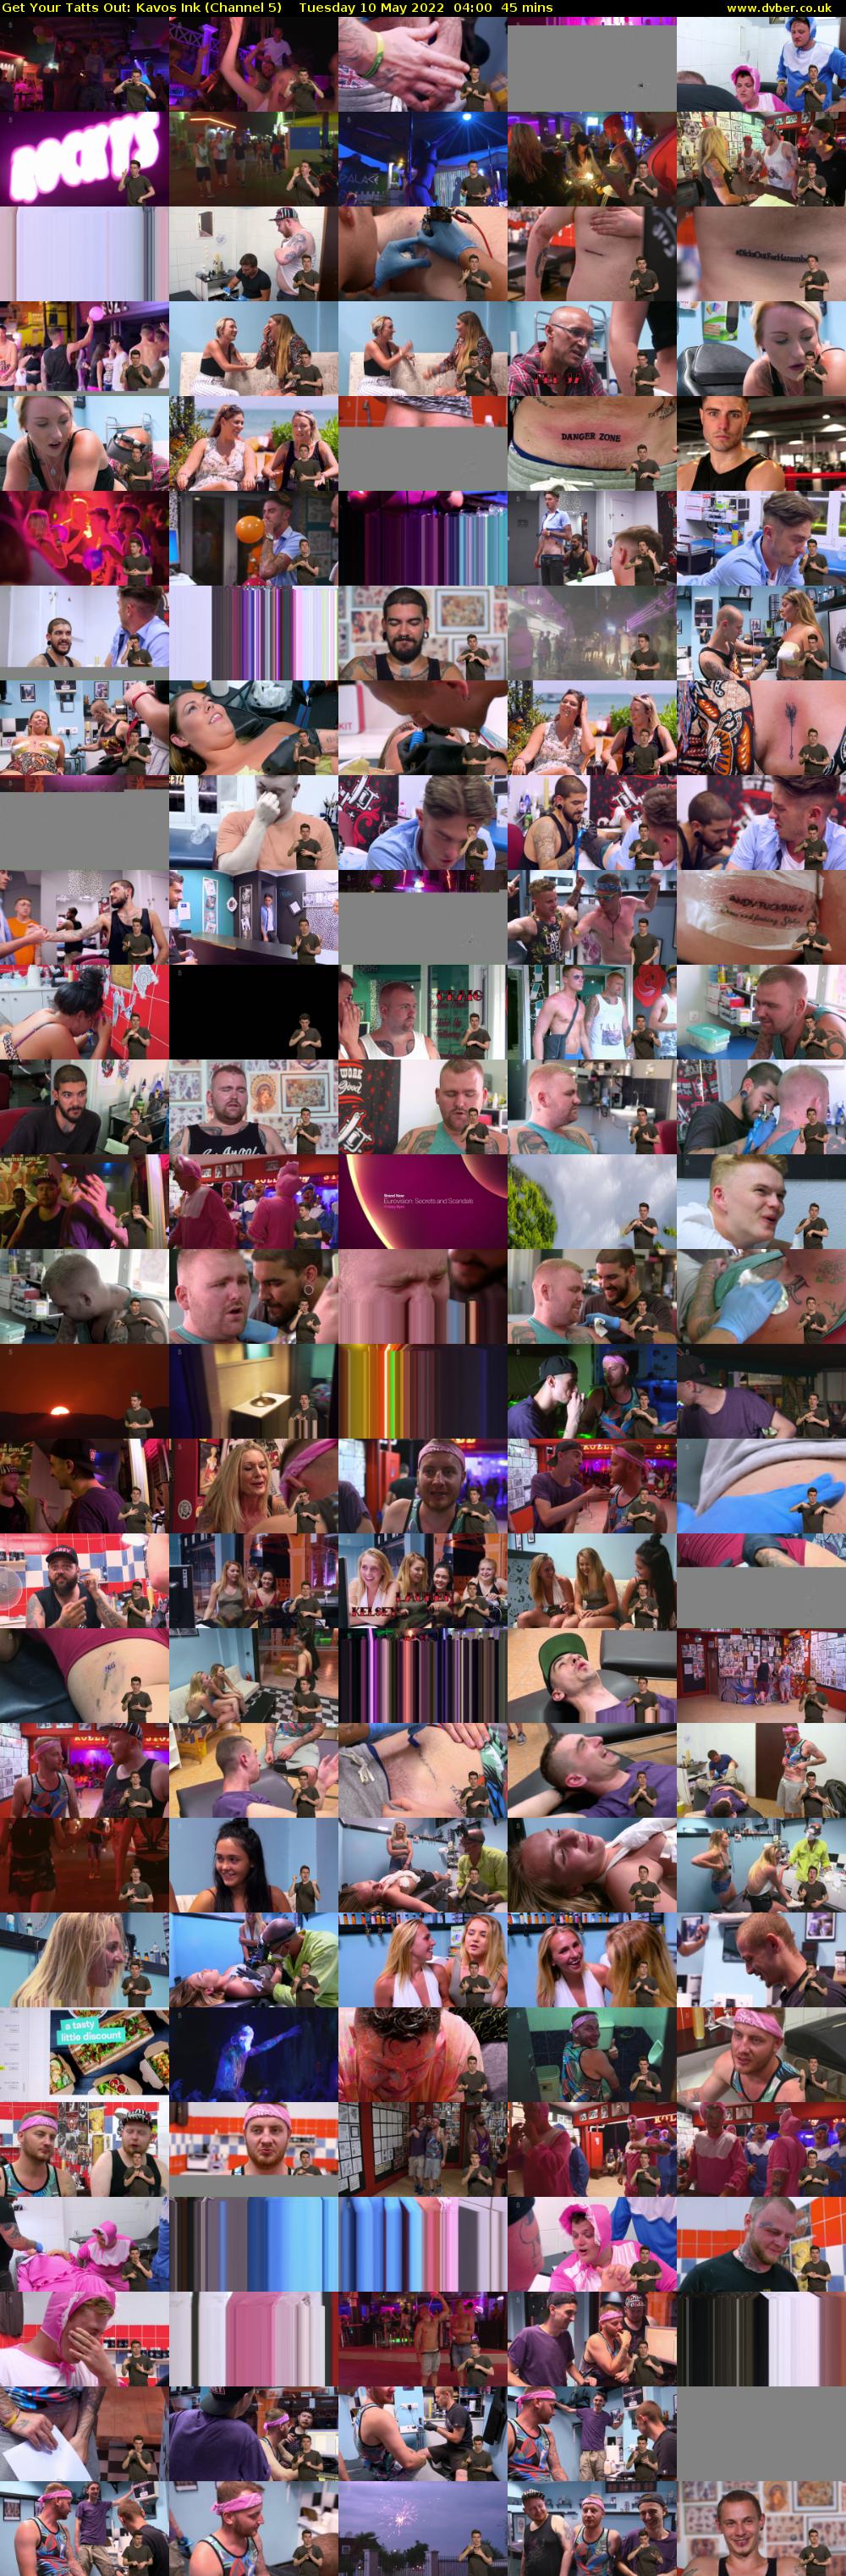 Get Your Tatts Out: Kavos Ink (Channel 5) Tuesday 10 May 2022 04:00 - 04:45